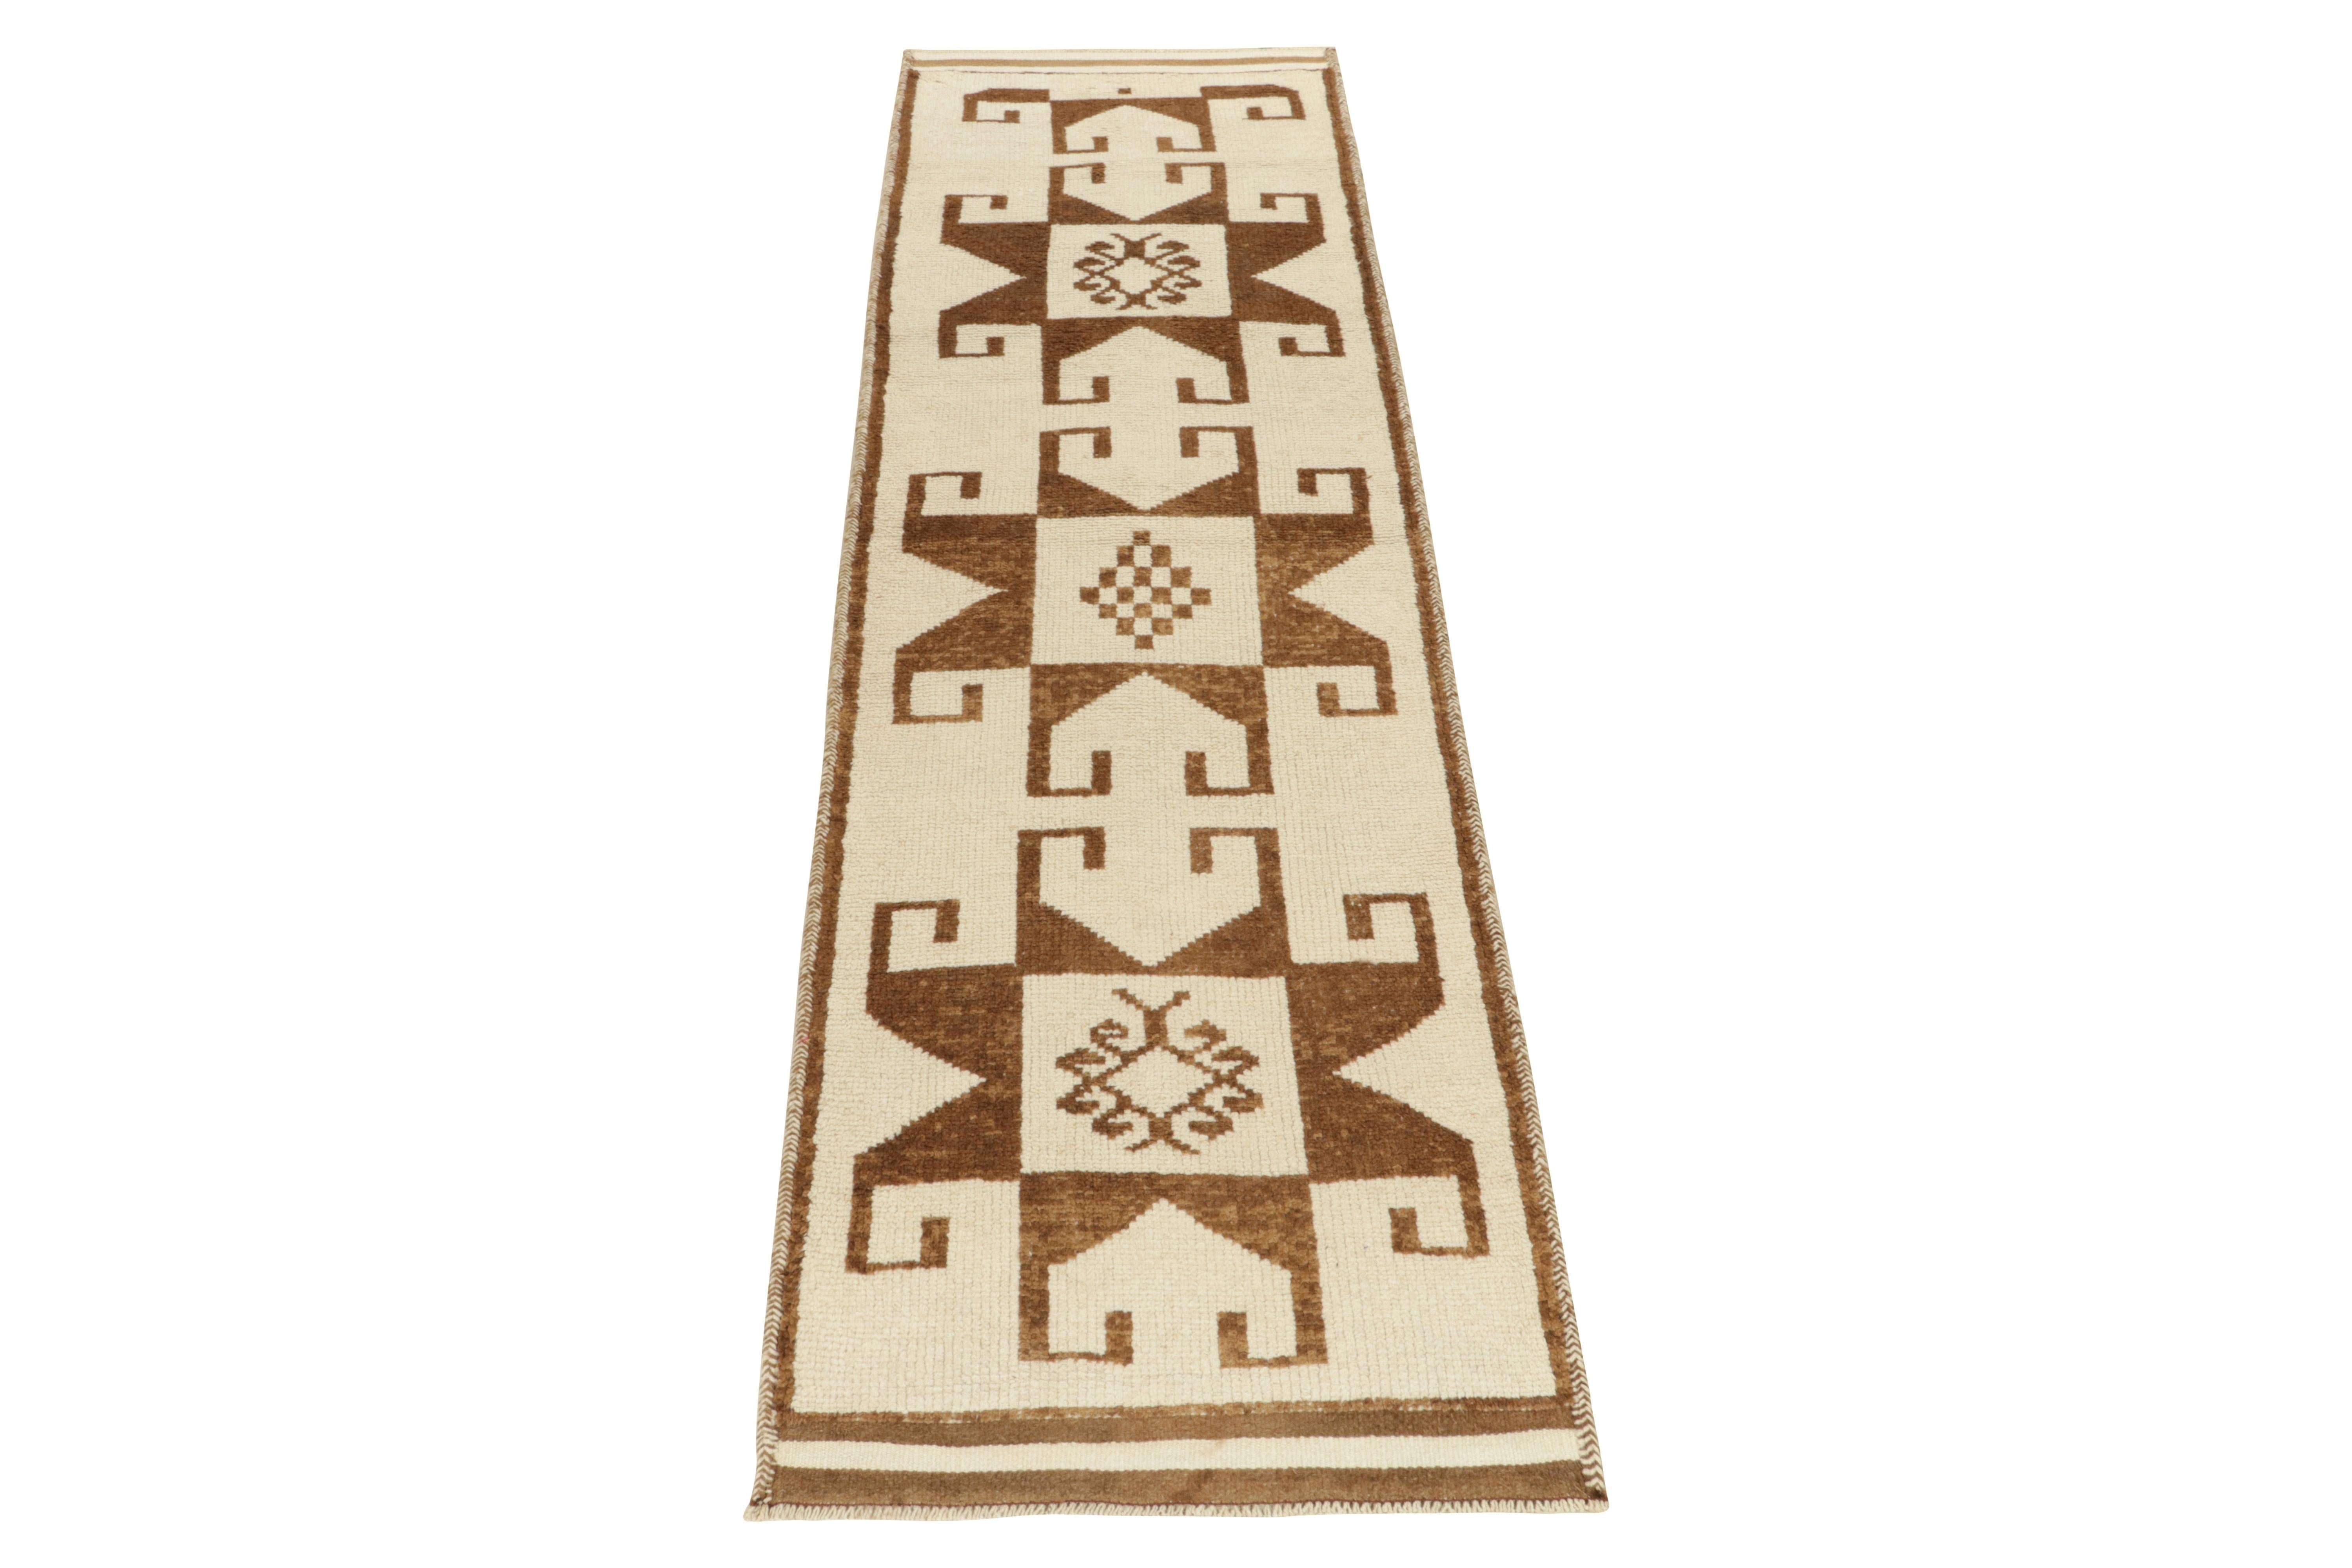 From Rug & Kilim’s vintage selections, a 3x12 hand-knotted wool runner of uniquely forgiving hues for its nomadic sensibility. 

This 1950s tribal piece from Turkey showcases traditional motifs sitting confidently like medallions on the field in